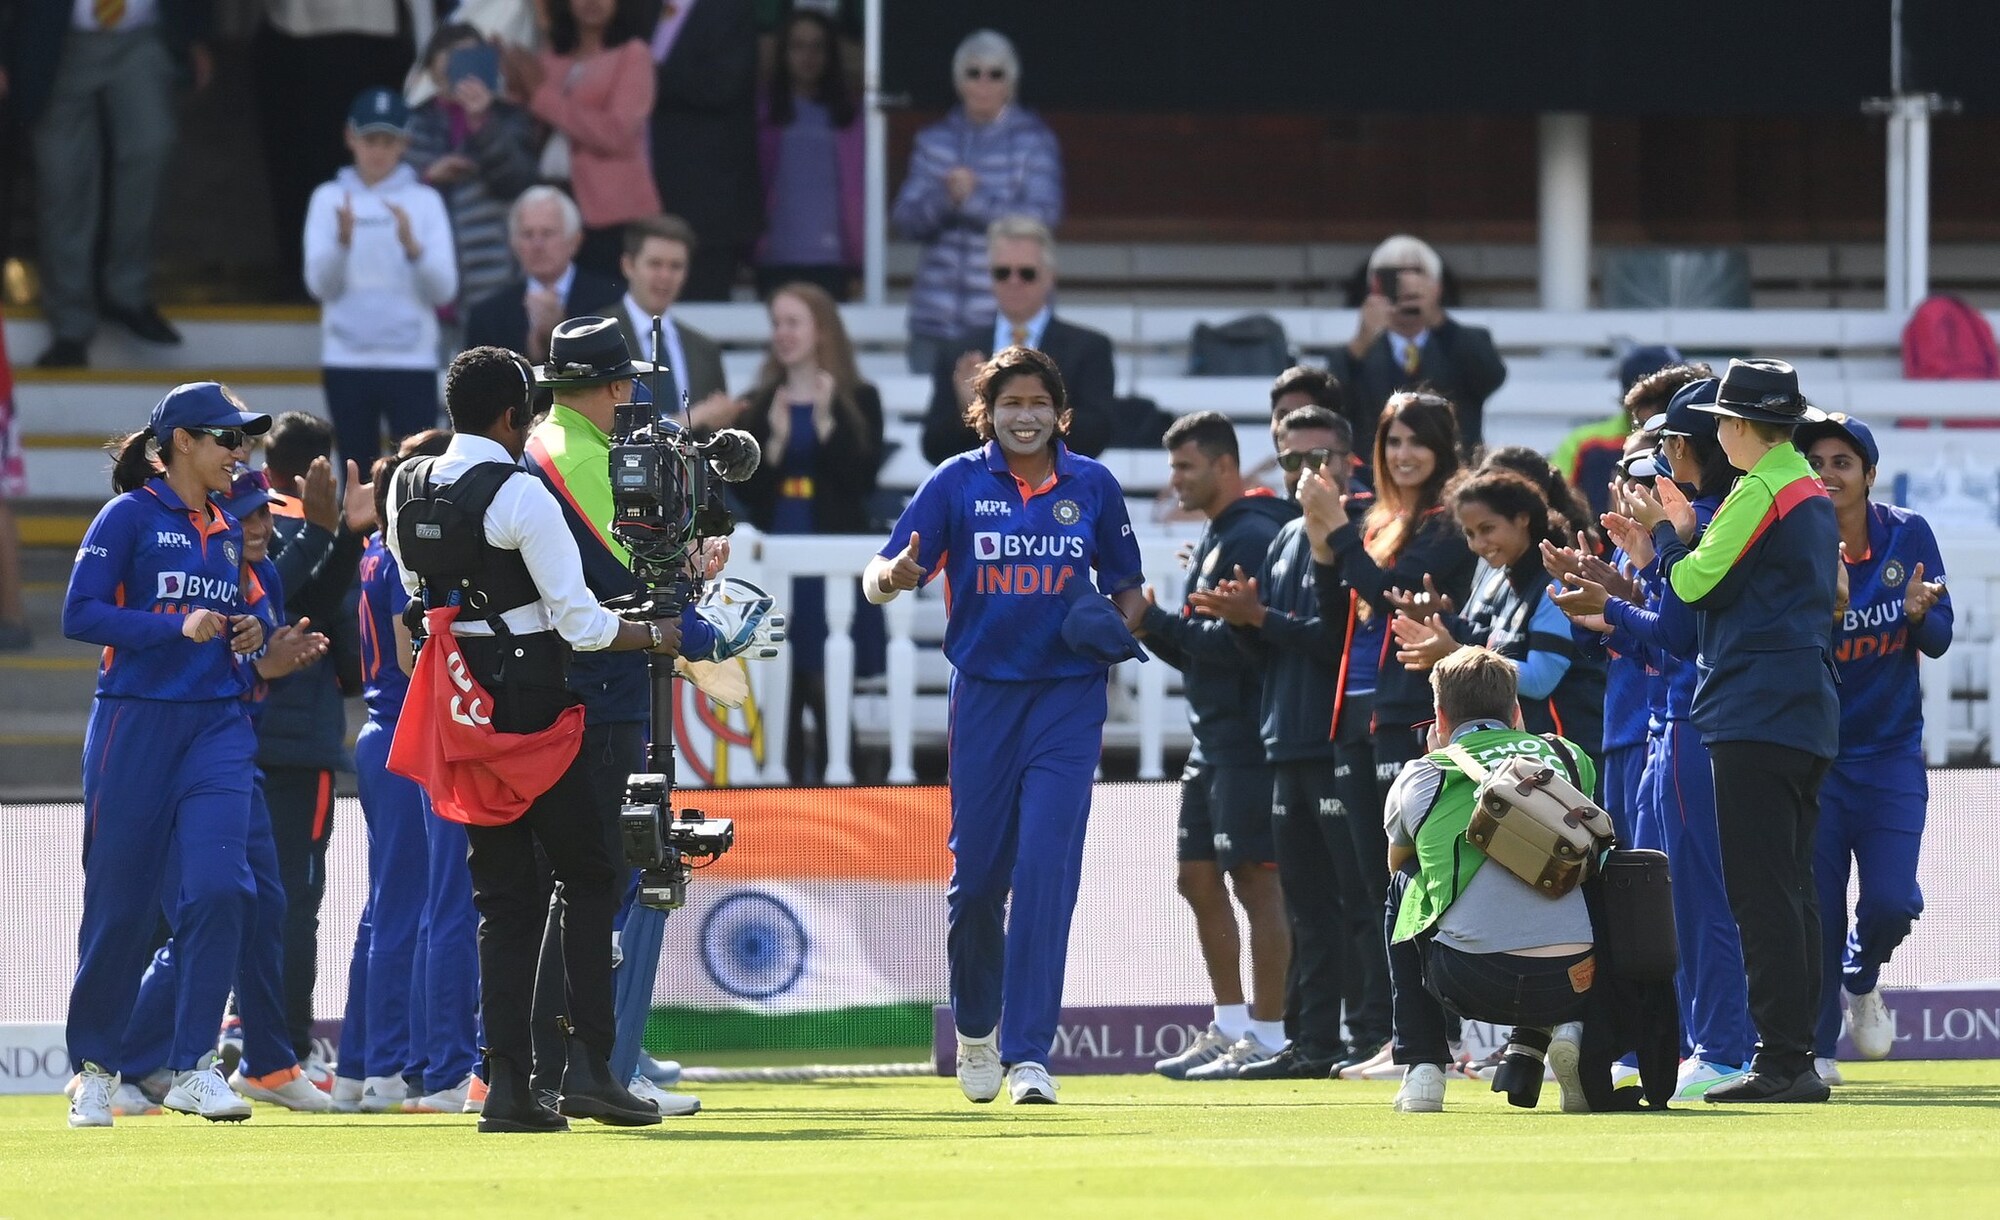 Jhulan Goswami also received a guard of honour from her teammates as well when India came out to bowl in the second innings. Twitter/England Cricket